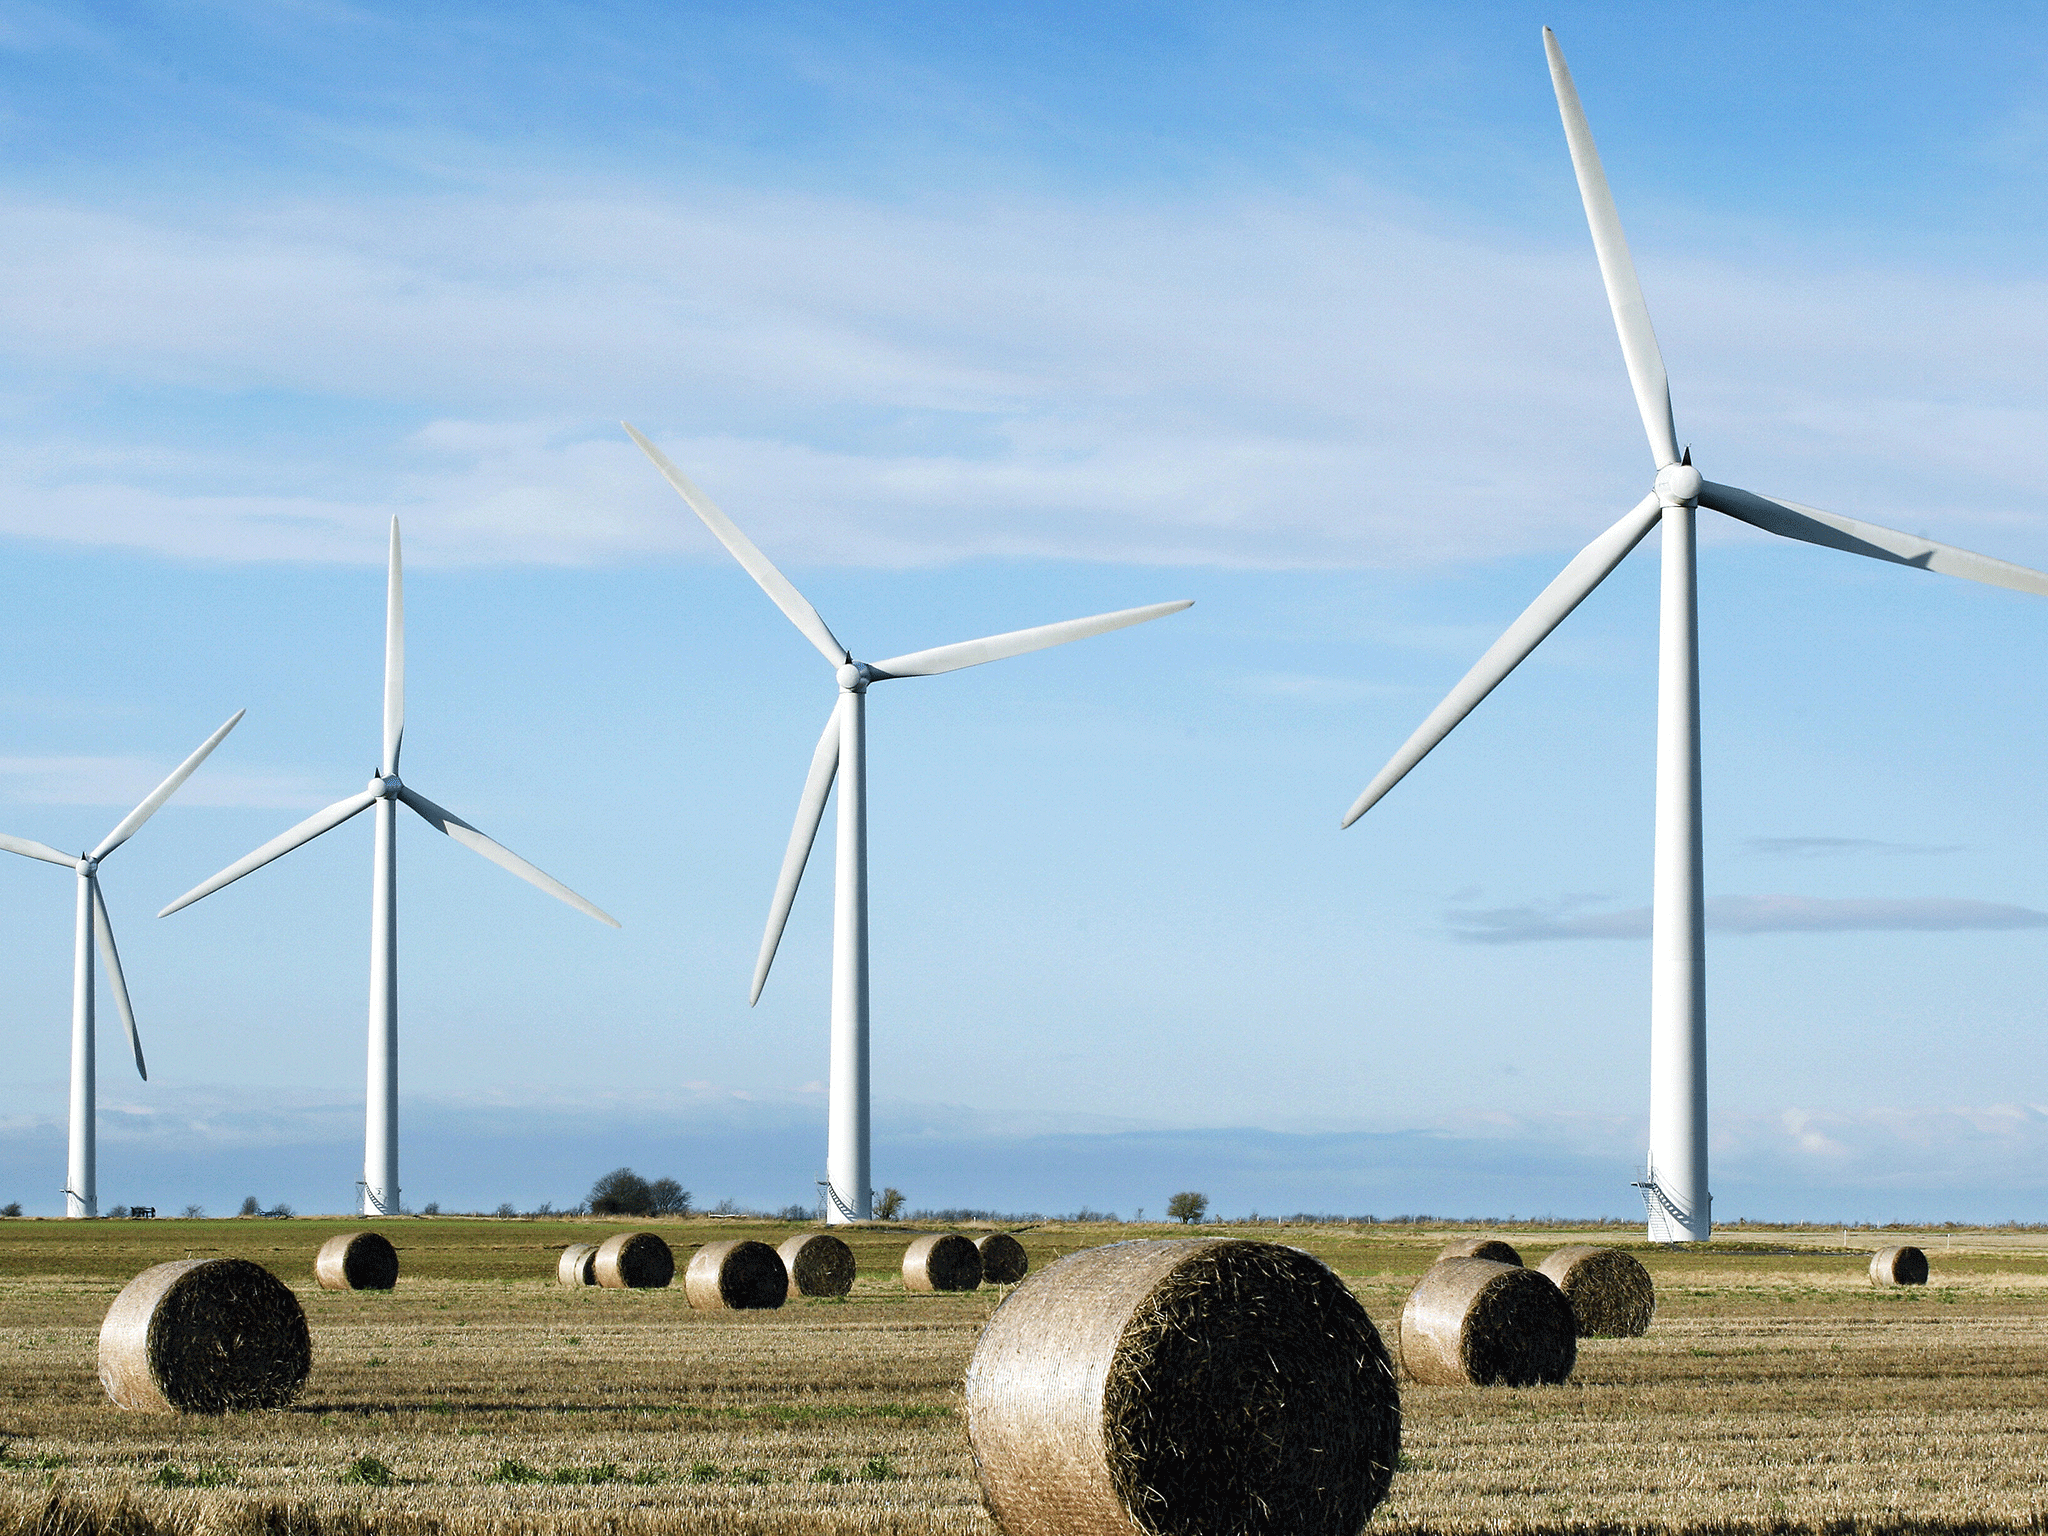 Conservative plans to end subsidies for onshore wind farms will push up energy bills and leave thousands of jobs in the balance, campaigners have warned